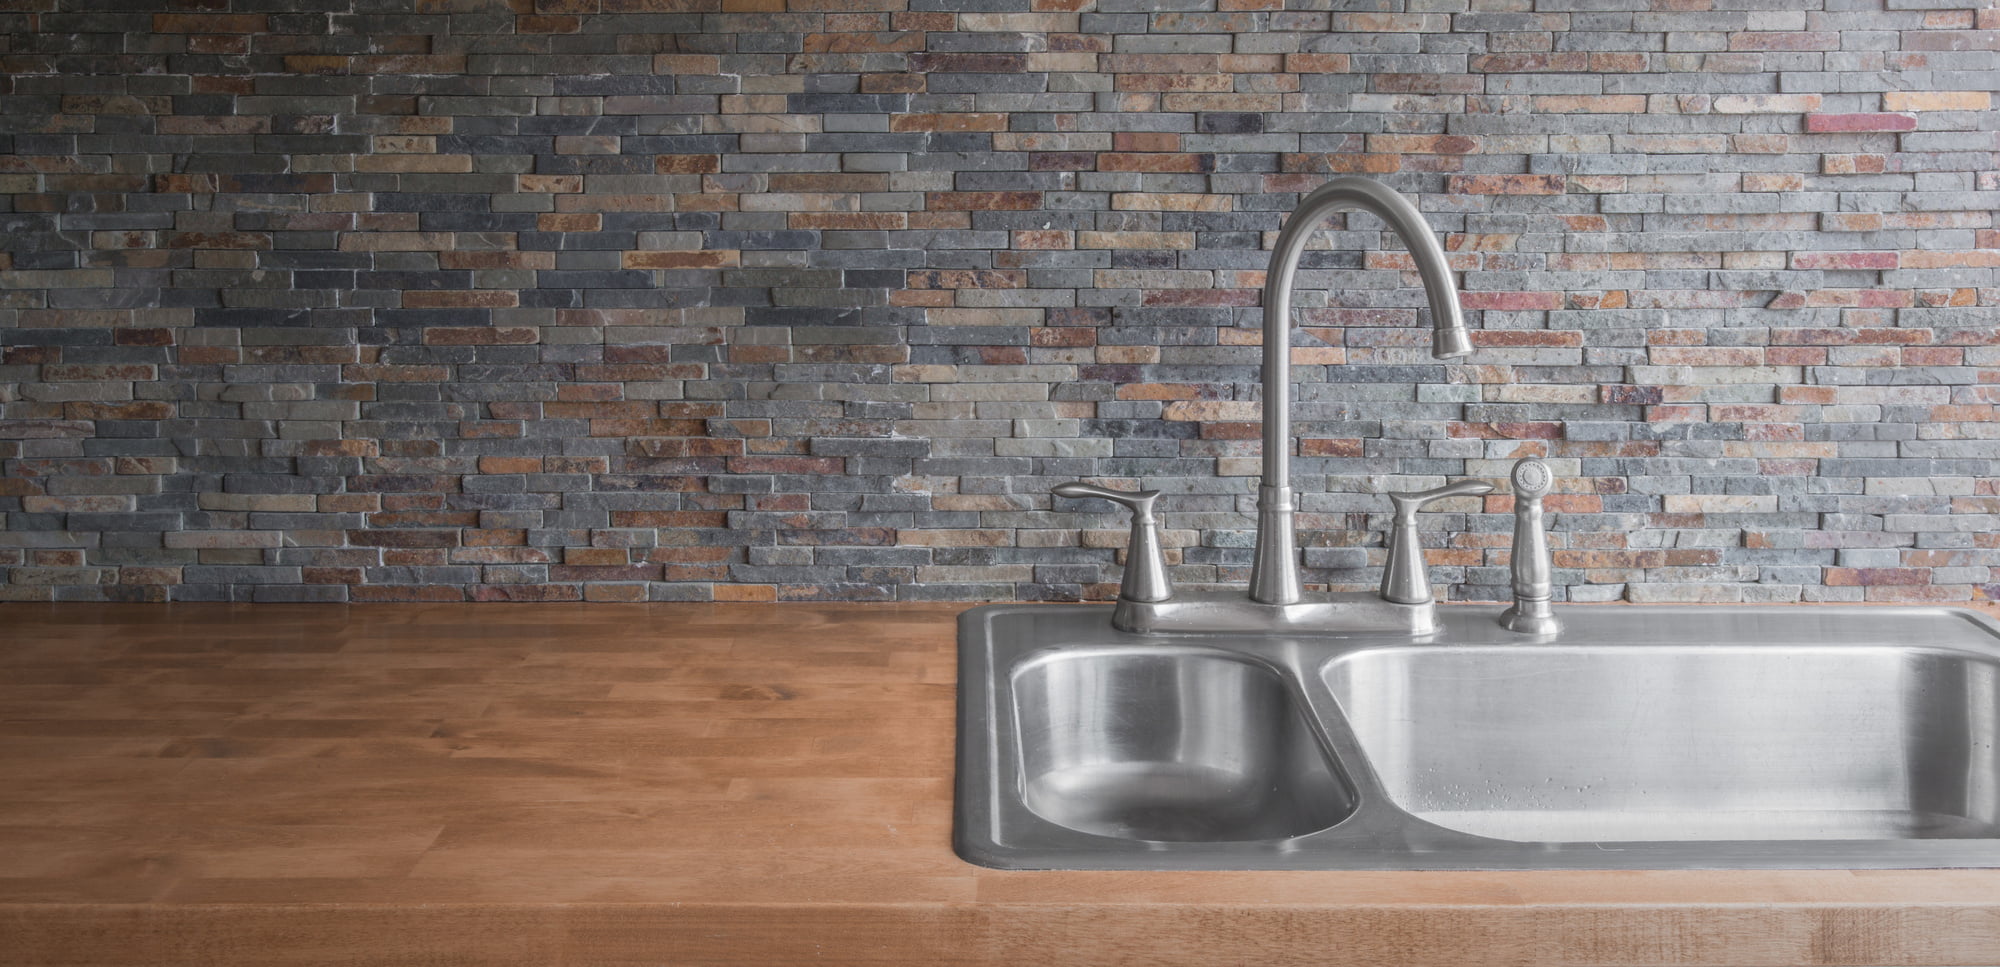 Are you interested in replacing the backsplash in your kitchen? Click here for a guide to the most popular backsplash patterns of 2023.